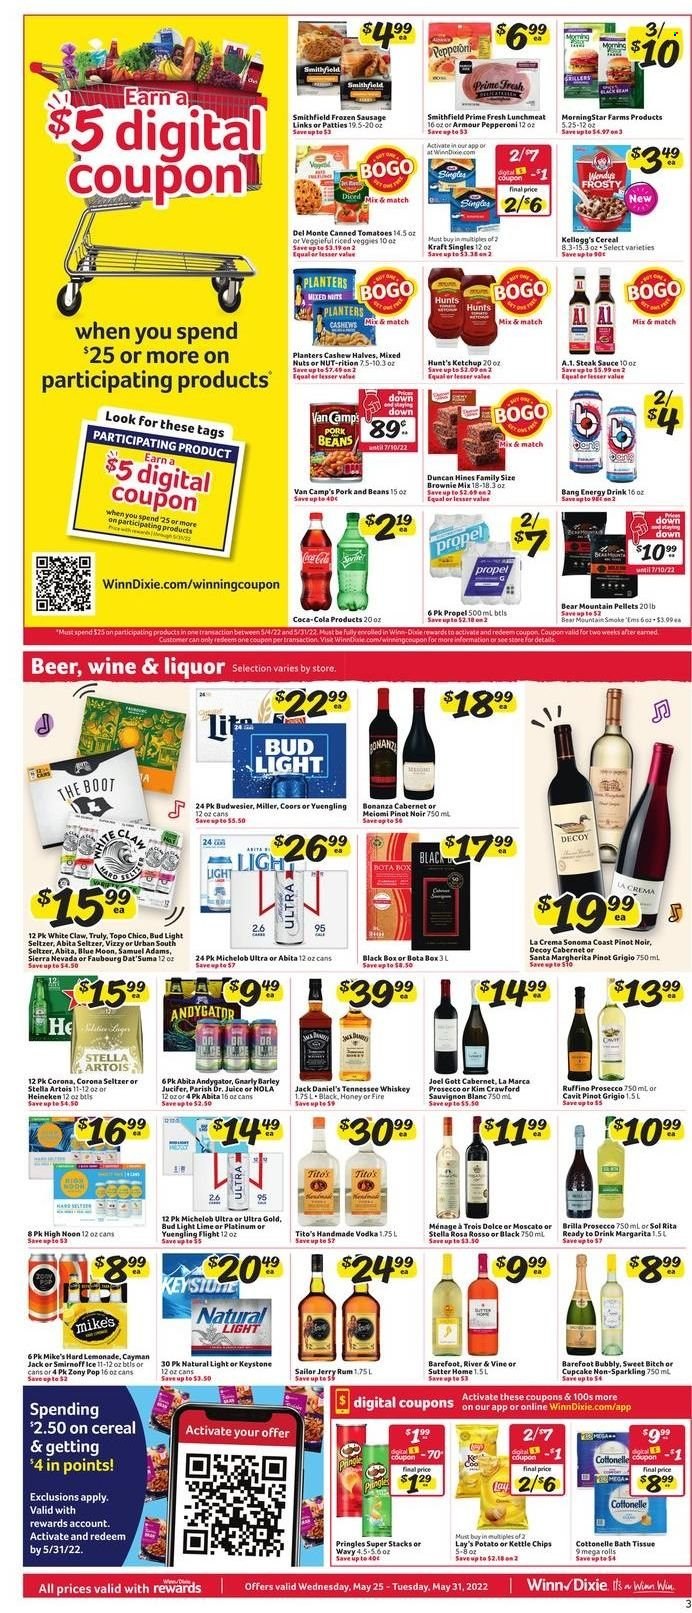 thumbnail - Winn Dixie Flyer - 05/25/2022 - 05/31/2022 - Sales products - brownie mix, beans, tomatoes, Jack Daniel's, sauce, Kraft®, sausage, pepperoni, lunch meat, sandwich slices, Kraft Singles, Kellogg's, Santa, Pringles, Lay’s, cereals, steak sauce, ketchup, cashews, mixed nuts, Planters, Coca-Cola, lemonade, juice, energy drink, Cabernet Sauvignon, white wine, prosecco, Pinot Noir, Moscato, Pinot Grigio, Sauvignon Blanc, rum, Smirnoff, Tennessee Whiskey, vodka, whiskey, liquor, White Claw, Hard Seltzer, TRULY, whisky, beer, Bud Light, Corona Extra, Heineken, Miller, Sol, Keystone, steak, bath tissue, Cottonelle, paper, Stella Artois, Coors, Blue Moon, Yuengling, Michelob. Page 3.